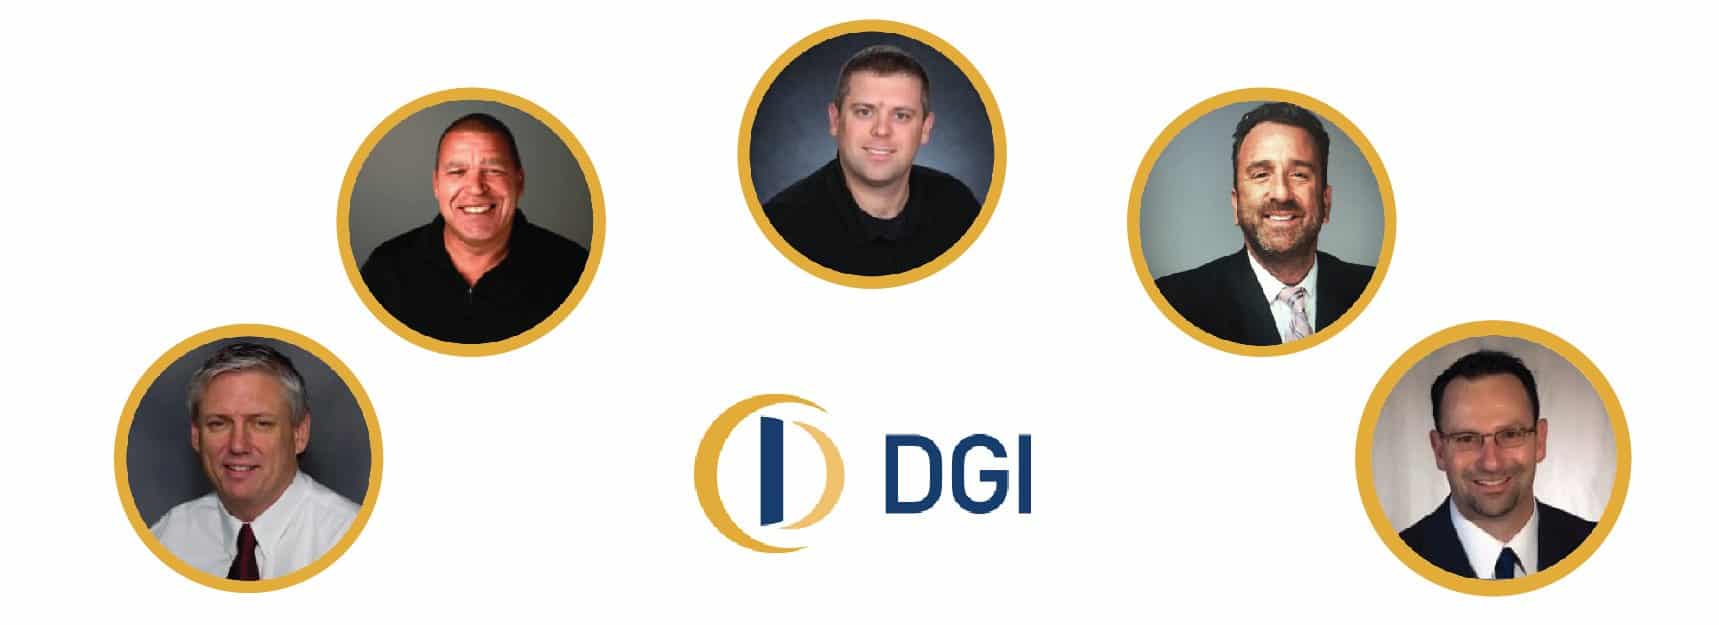 DGI Expands Team With 5 New Hires